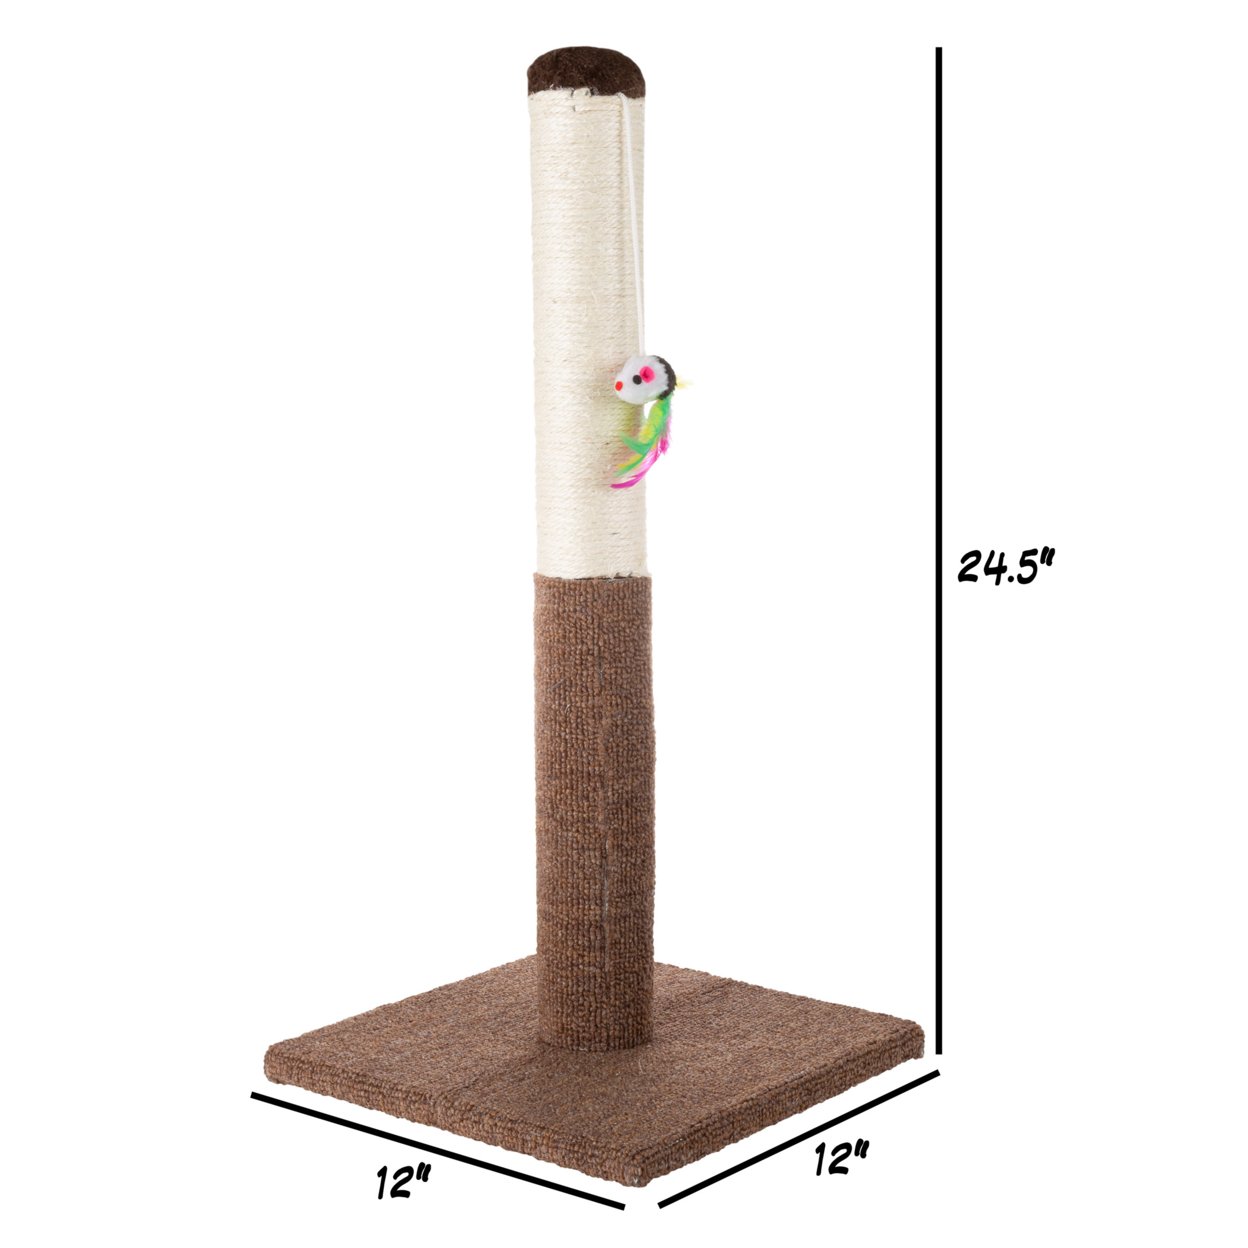 Cat Scratching Post - Tall Scratcher For Cats And Kittens With Sisal Rope And Carpet, Hanging Mouse Toy For Interactive Play